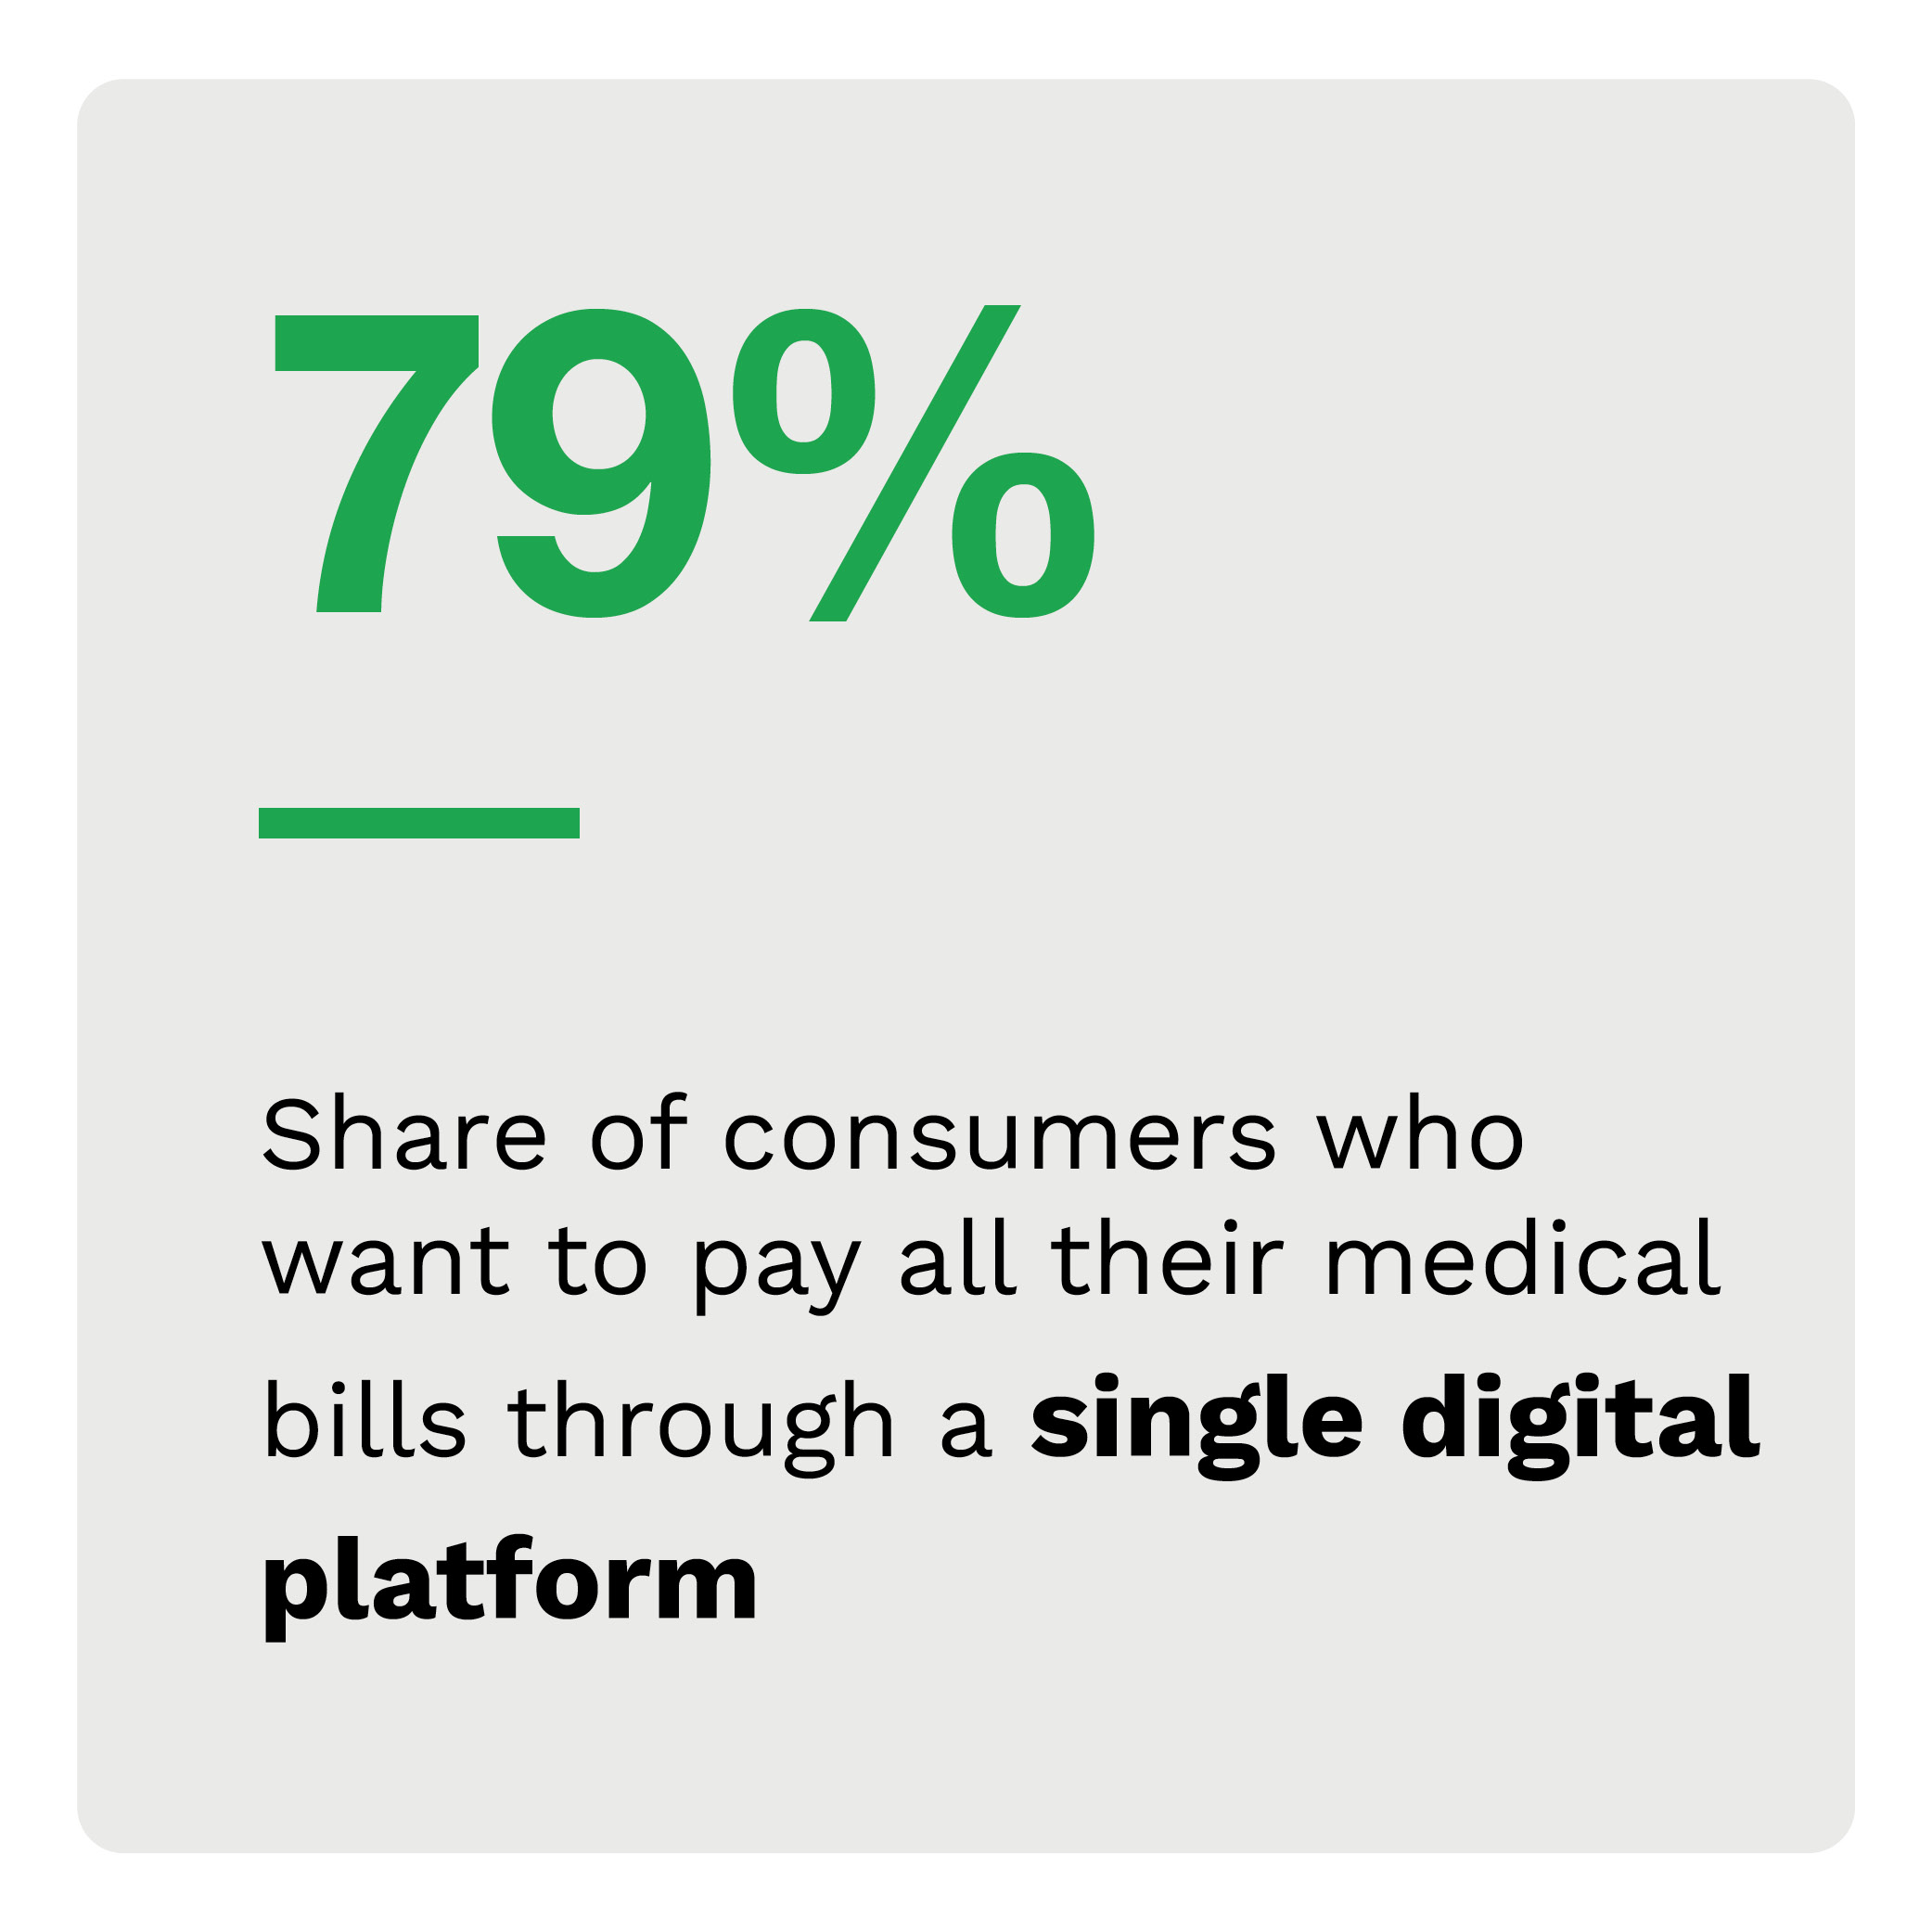 79%: Share of consumers who want to pay all their medical bills through a single digital platform